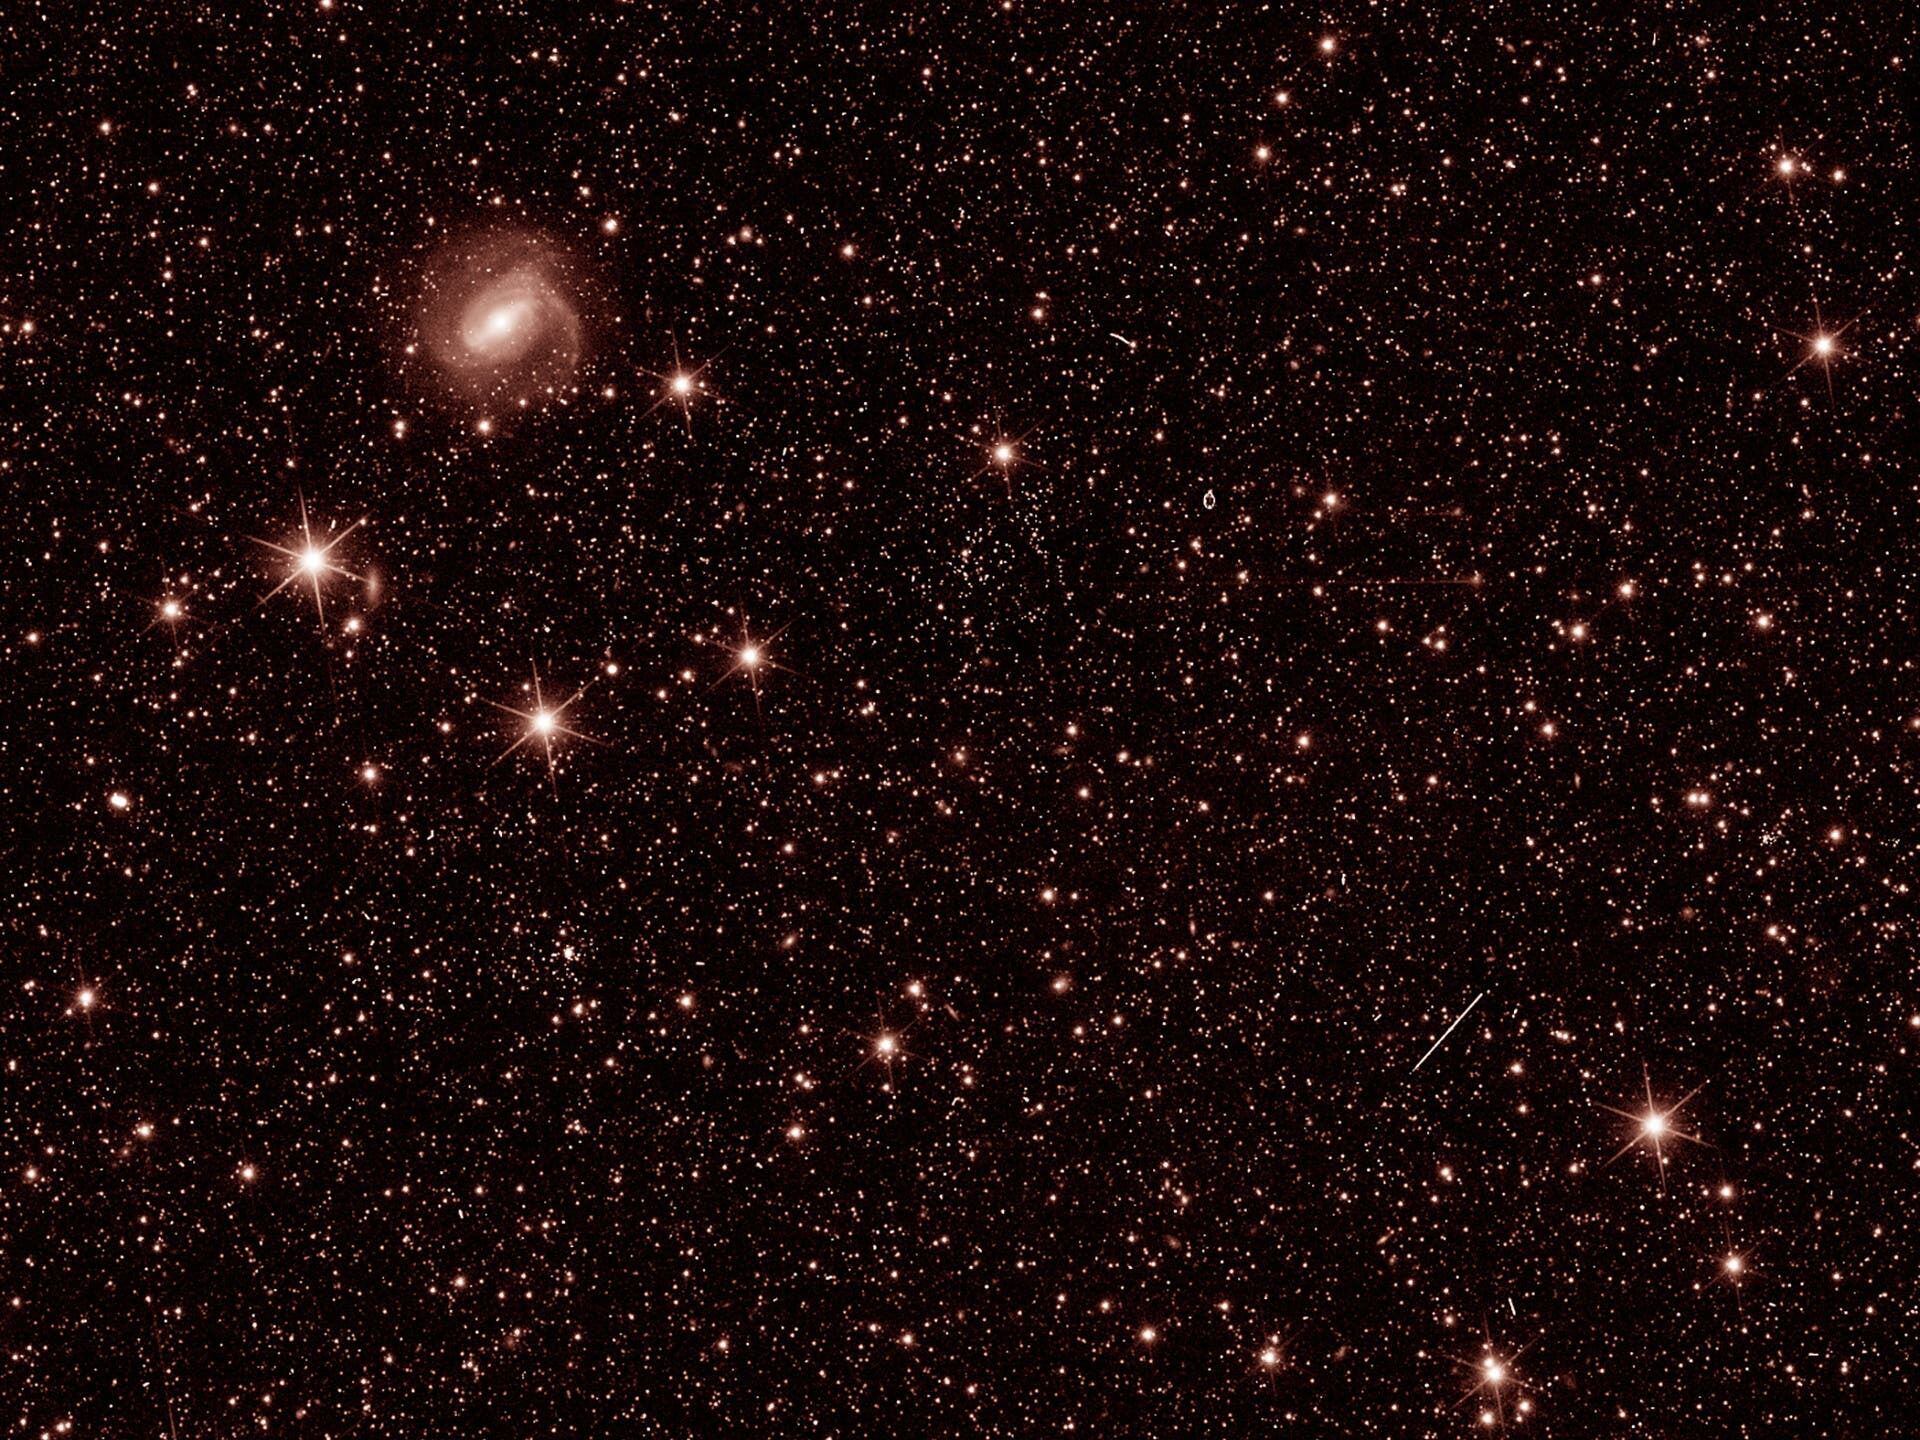 Space telescope Euclid captures glittering galaxies and stars in first images